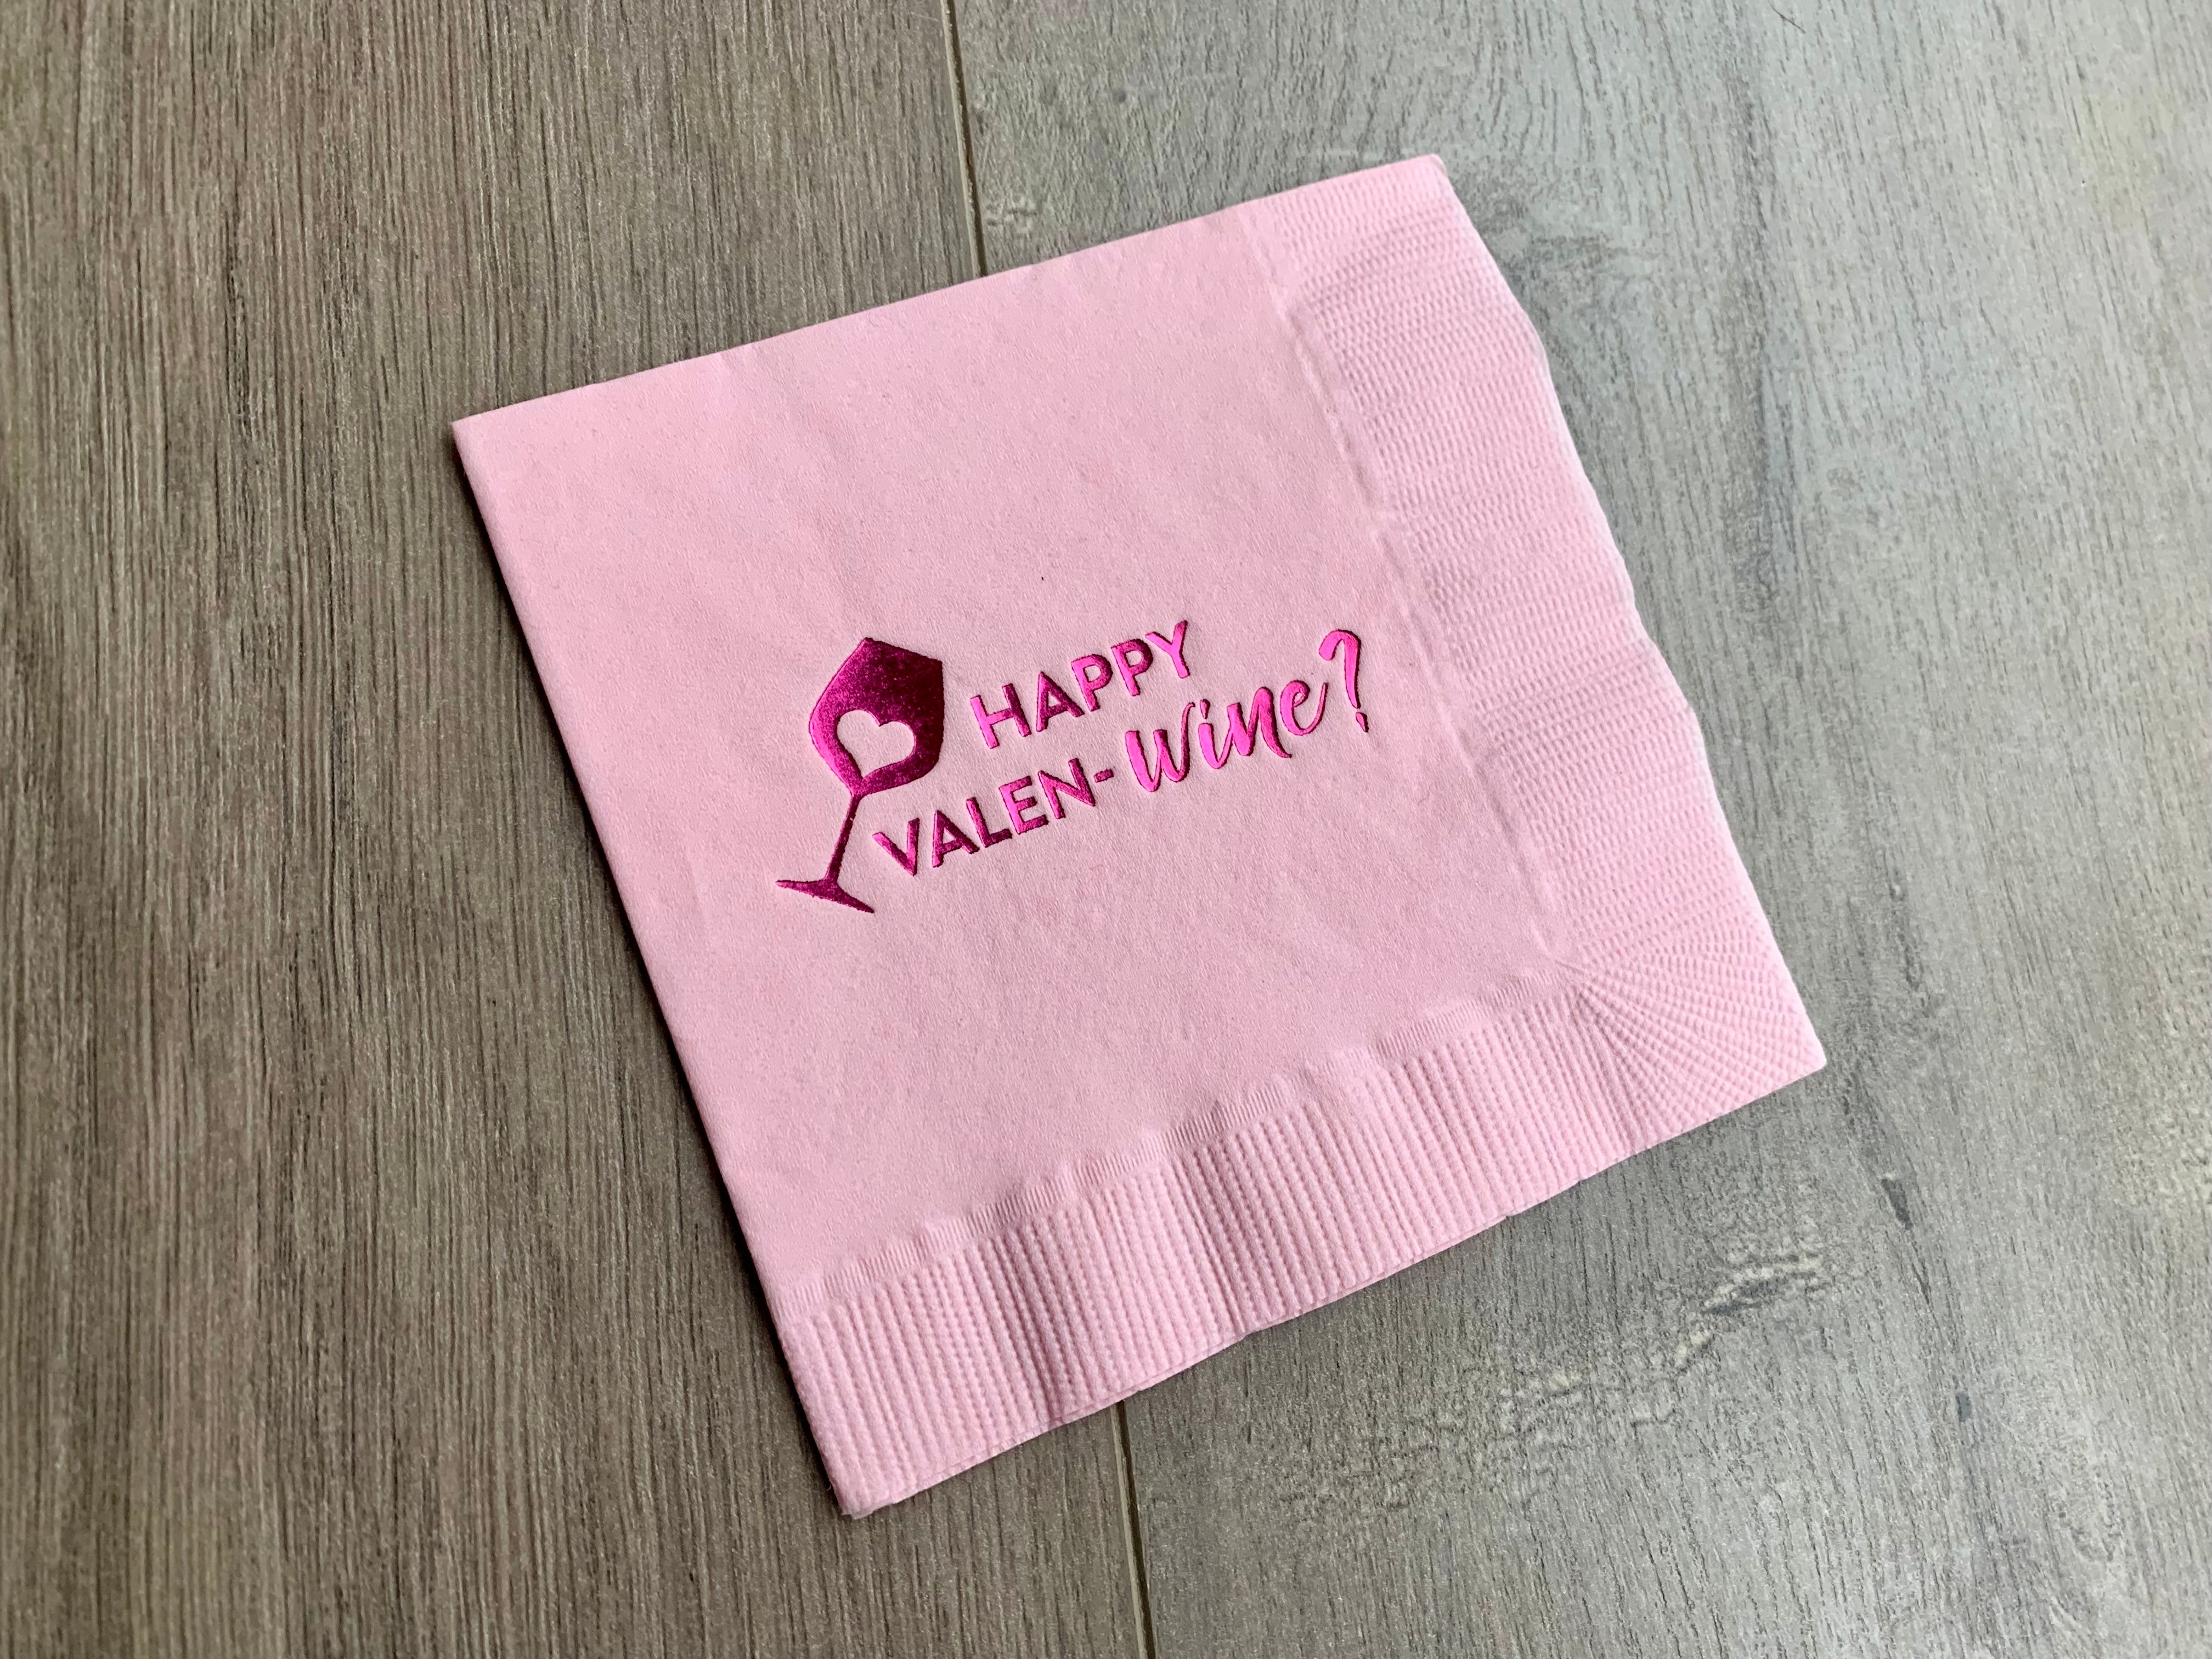 Pink Happy Valen-wine cocktail napkin by Stationare on wood background